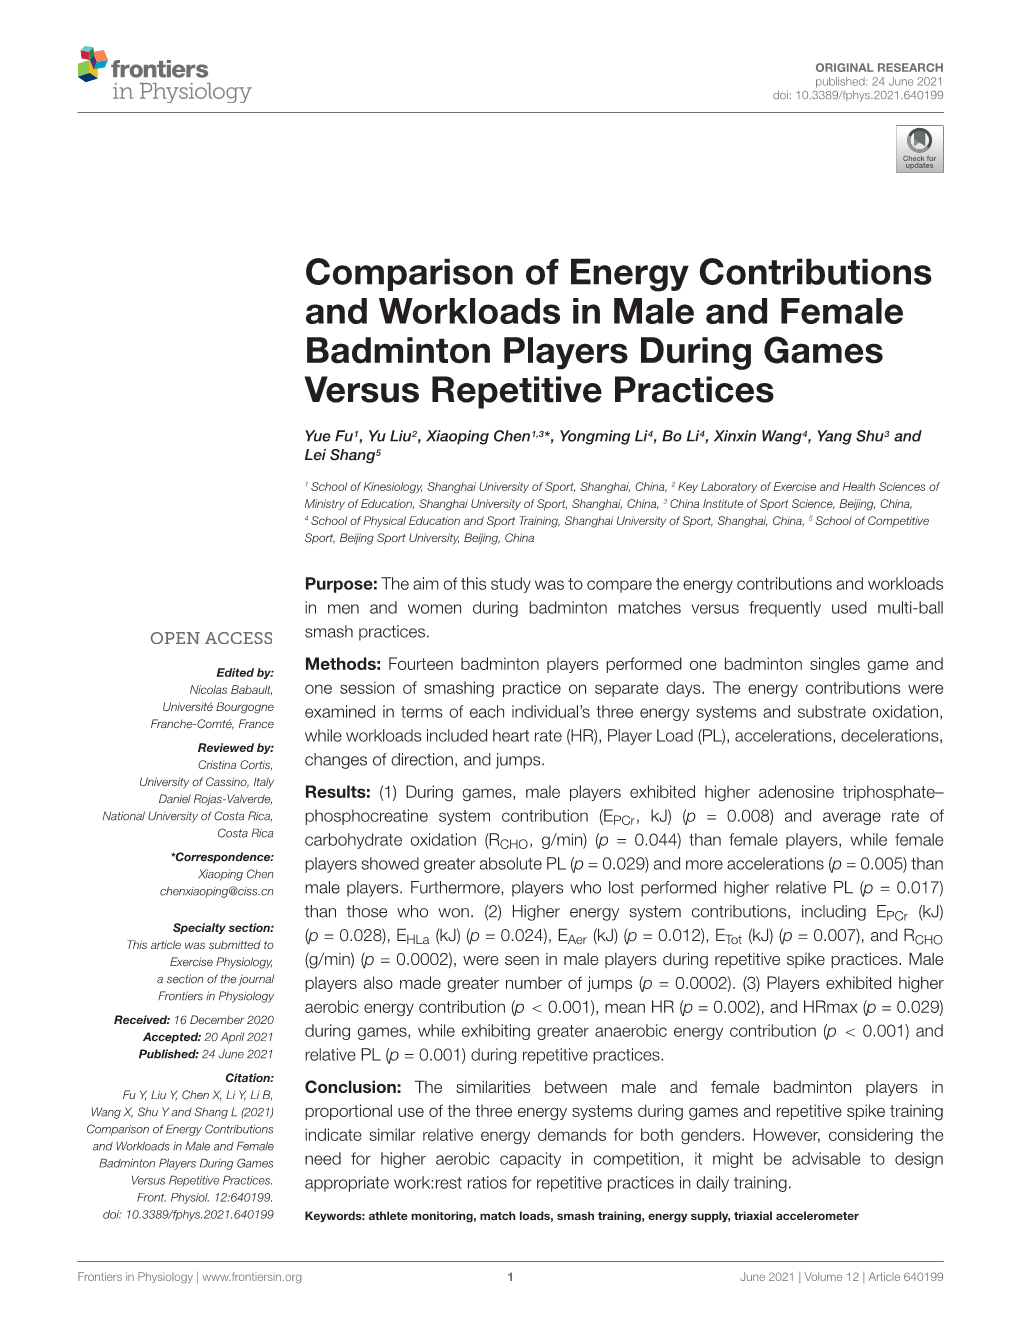 Comparison of Energy Contributions and Workloads in Male and Female Badminton Players During Games Versus Repetitive Practices